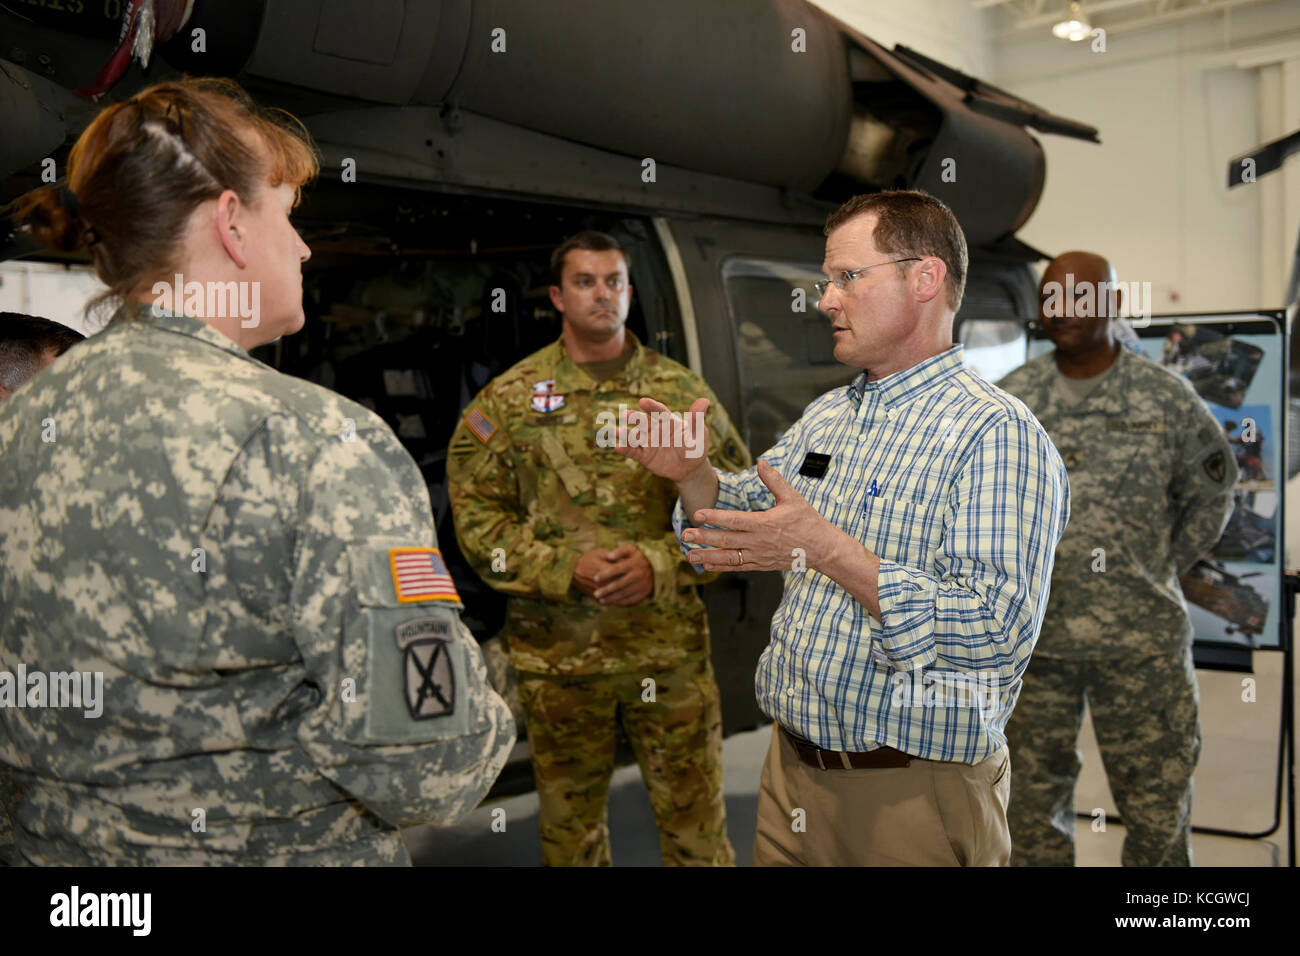 South Carolina Lieutenant Governor Kevin L. Bryant speaks with U.S. Army National Guard UH-60 helicopter pilots at McEntire Joint National Guard Base, July 21, 2017. Lt. Governor Bryant spoke with South Carolina Air and Army National Guard leadership about base missions and received a windshield tour of the installation with orientations of the various aircraft operated by South Carolina National Guard Airmen and Soldiers.  (U.S. Air National Guard photo by Master Sgt. Caycee Watson) Stock Photo